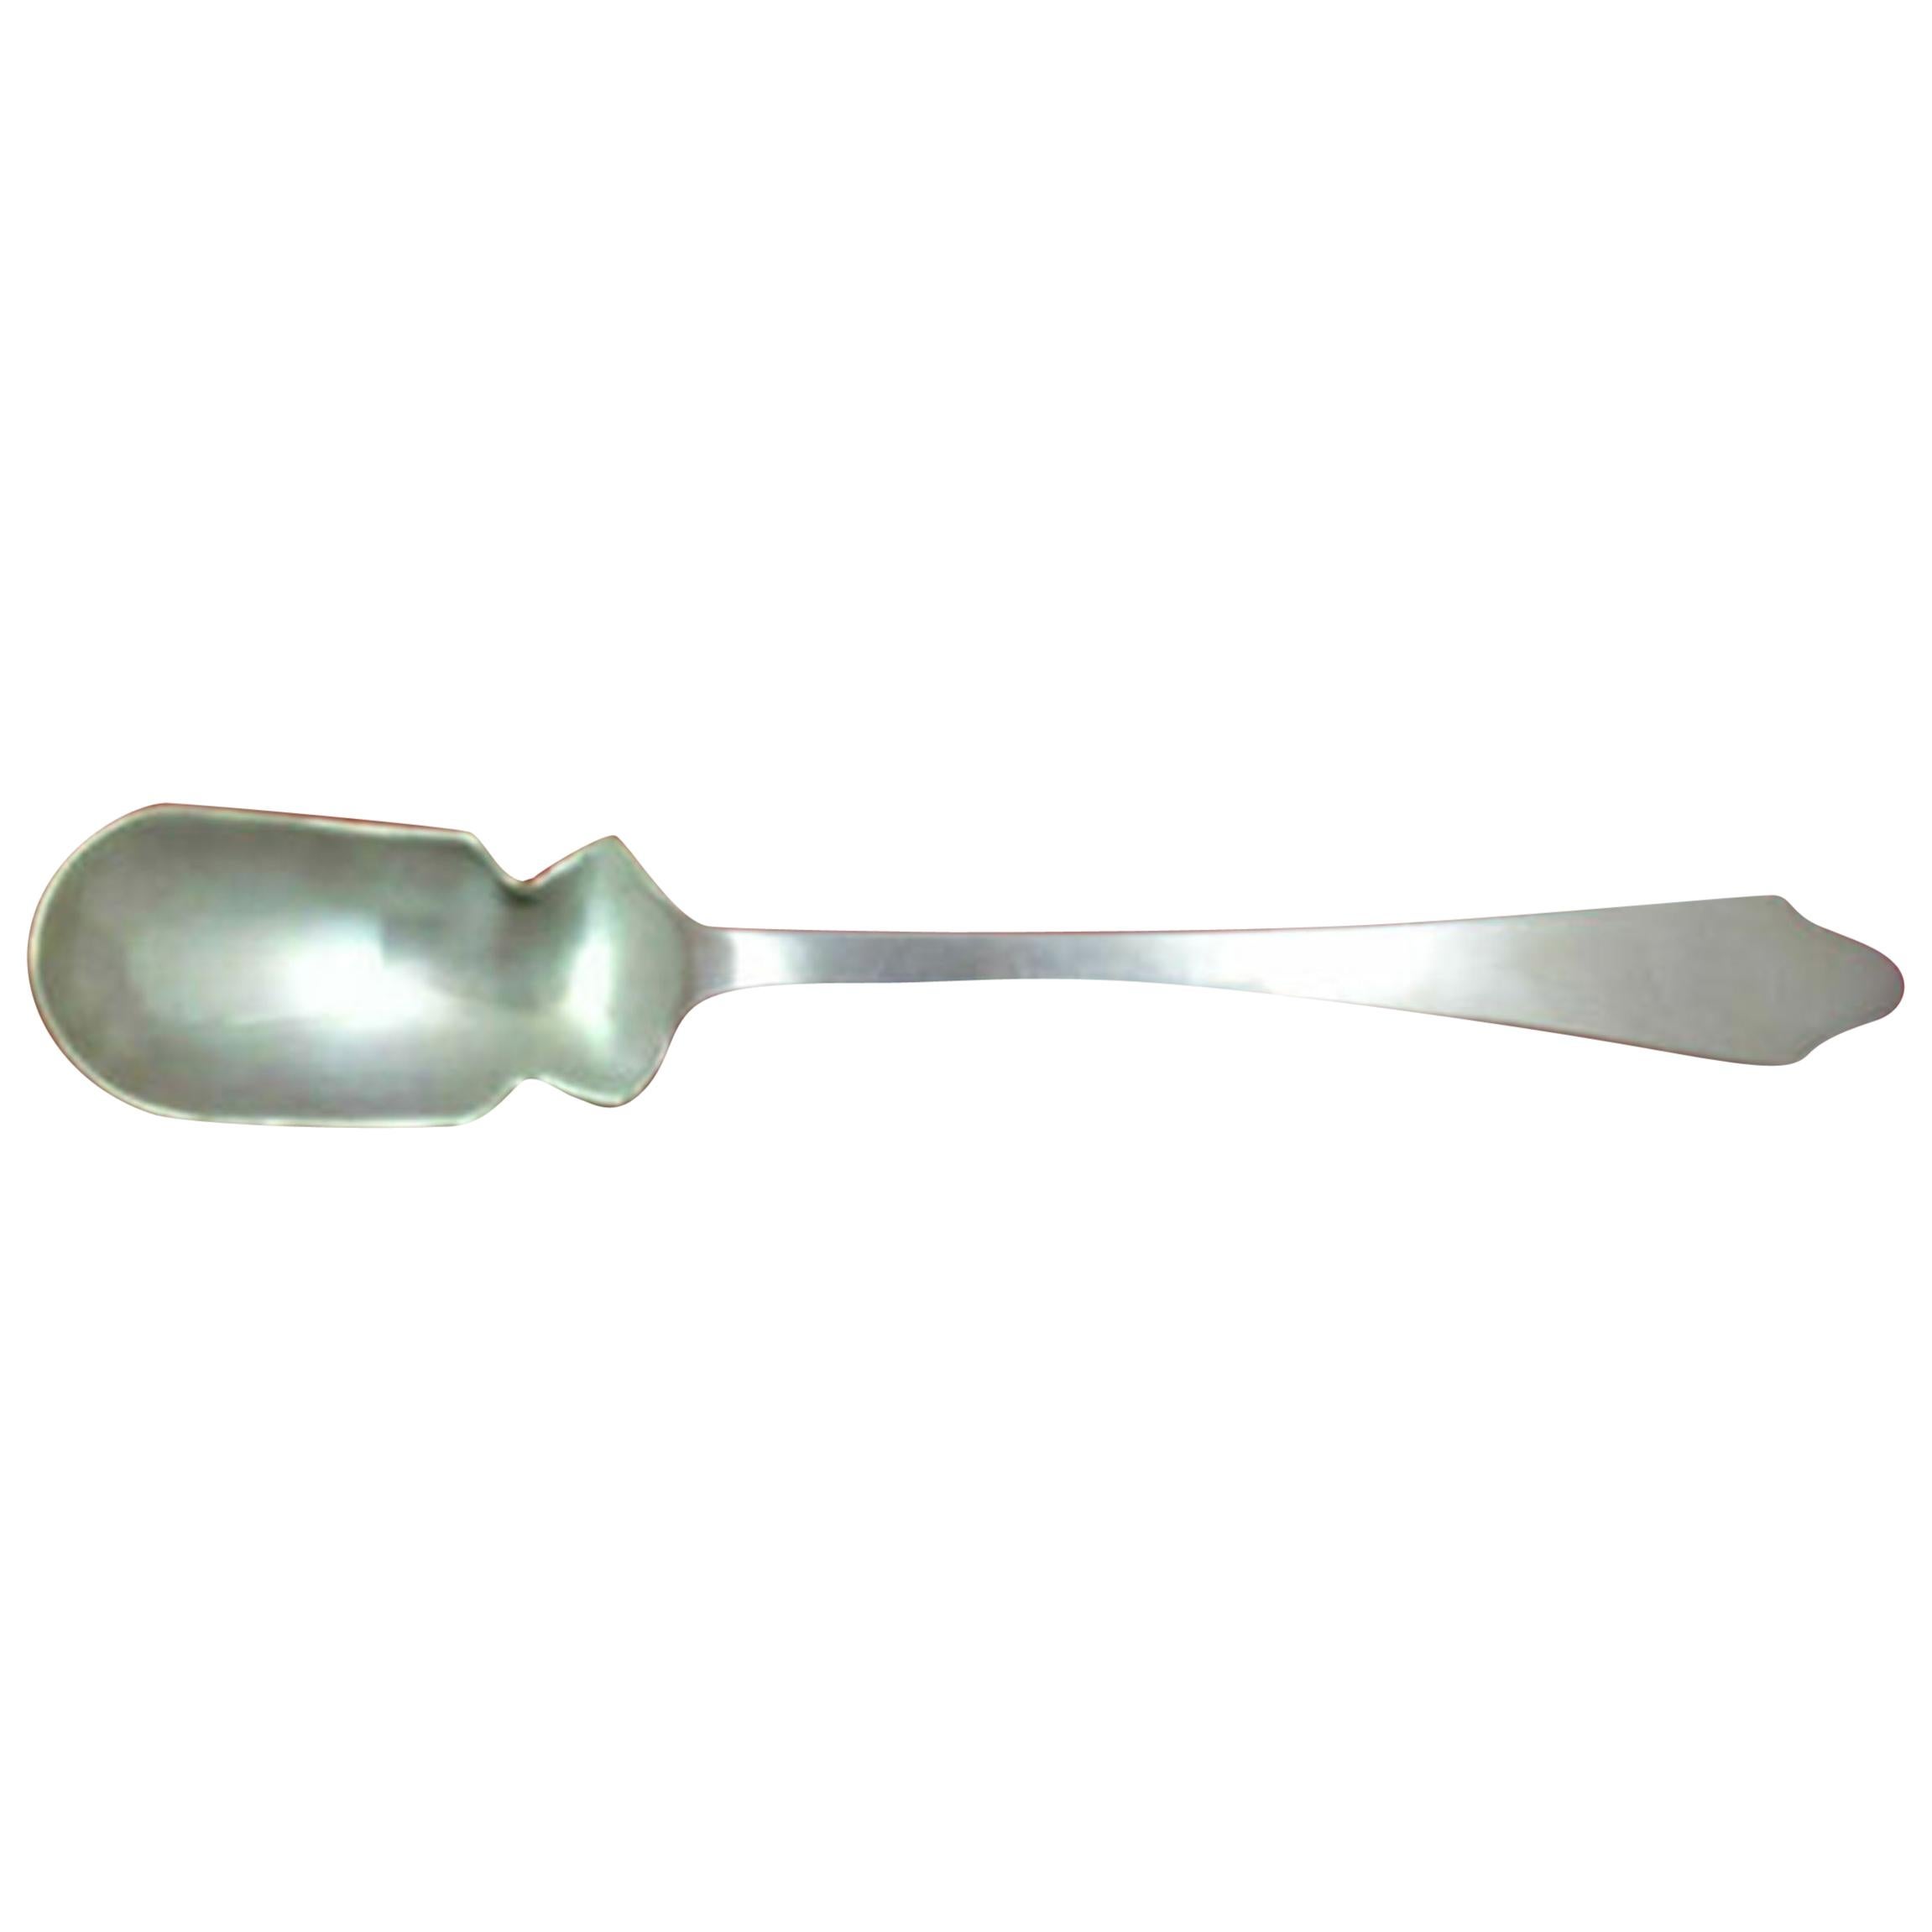 Clinton by Tiffany & Co. Sterling Silver Horseradish Scoop Custom Made 5 3/4"